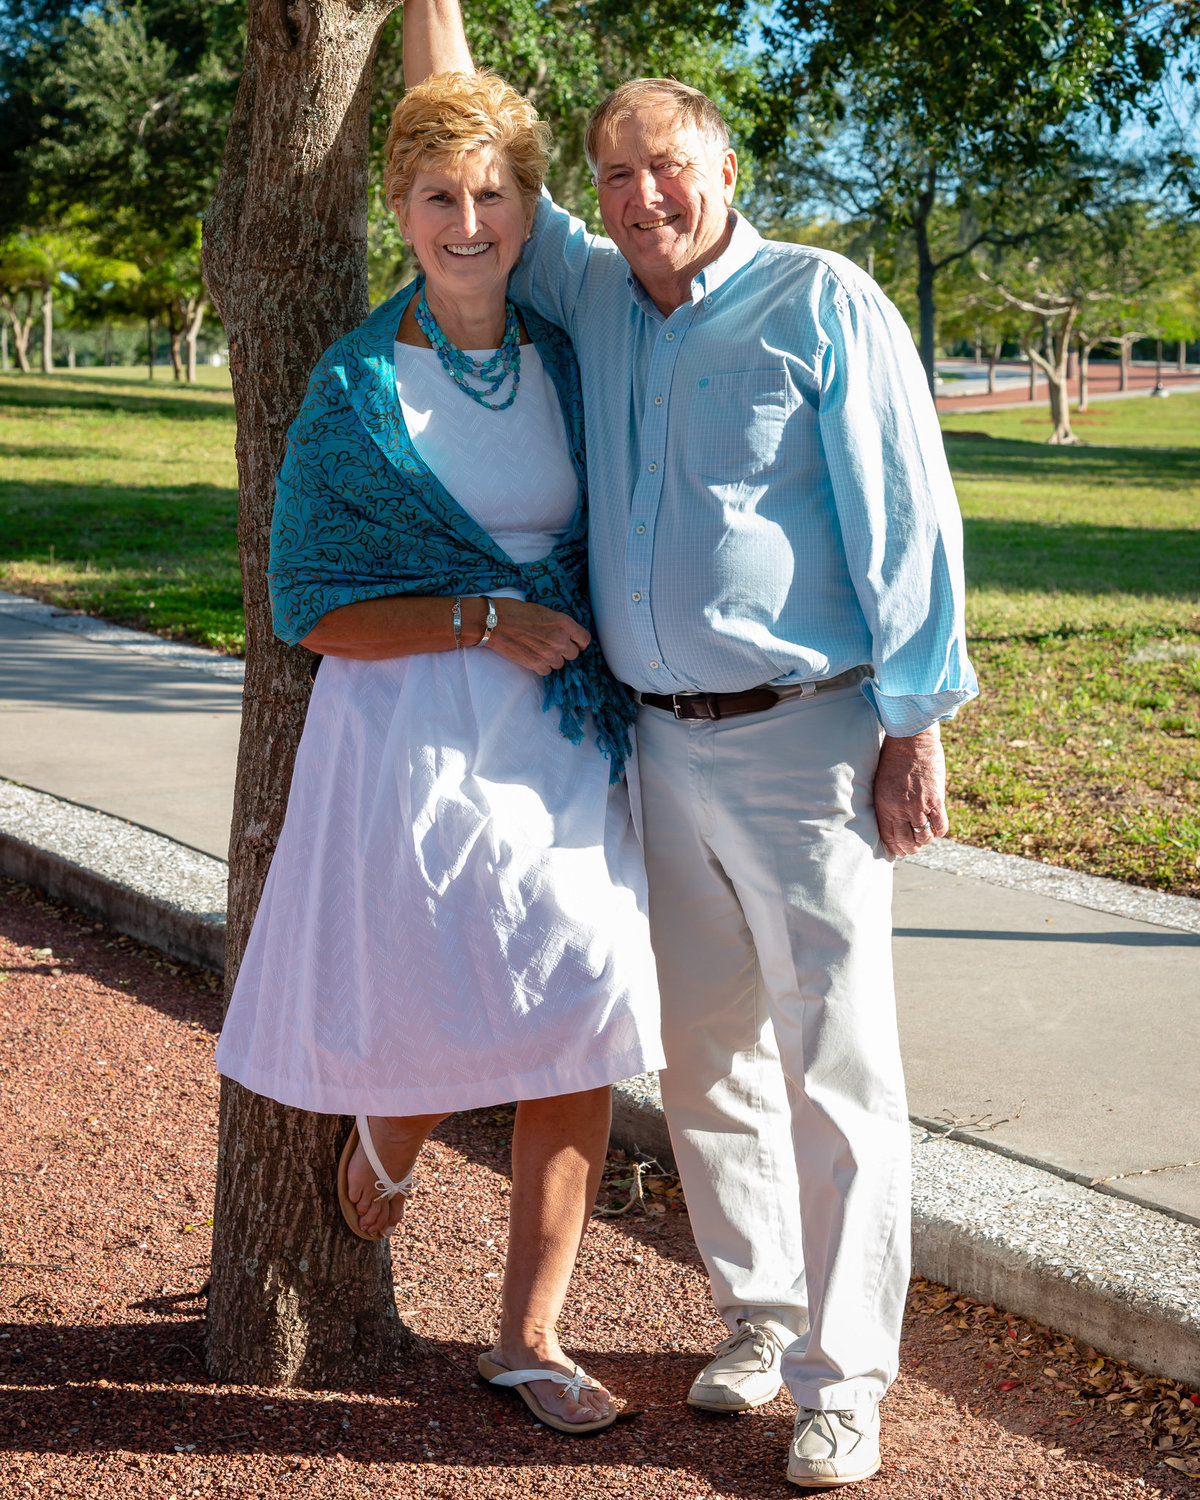 An elderly couple poses for a family photo at a park in Sarasota